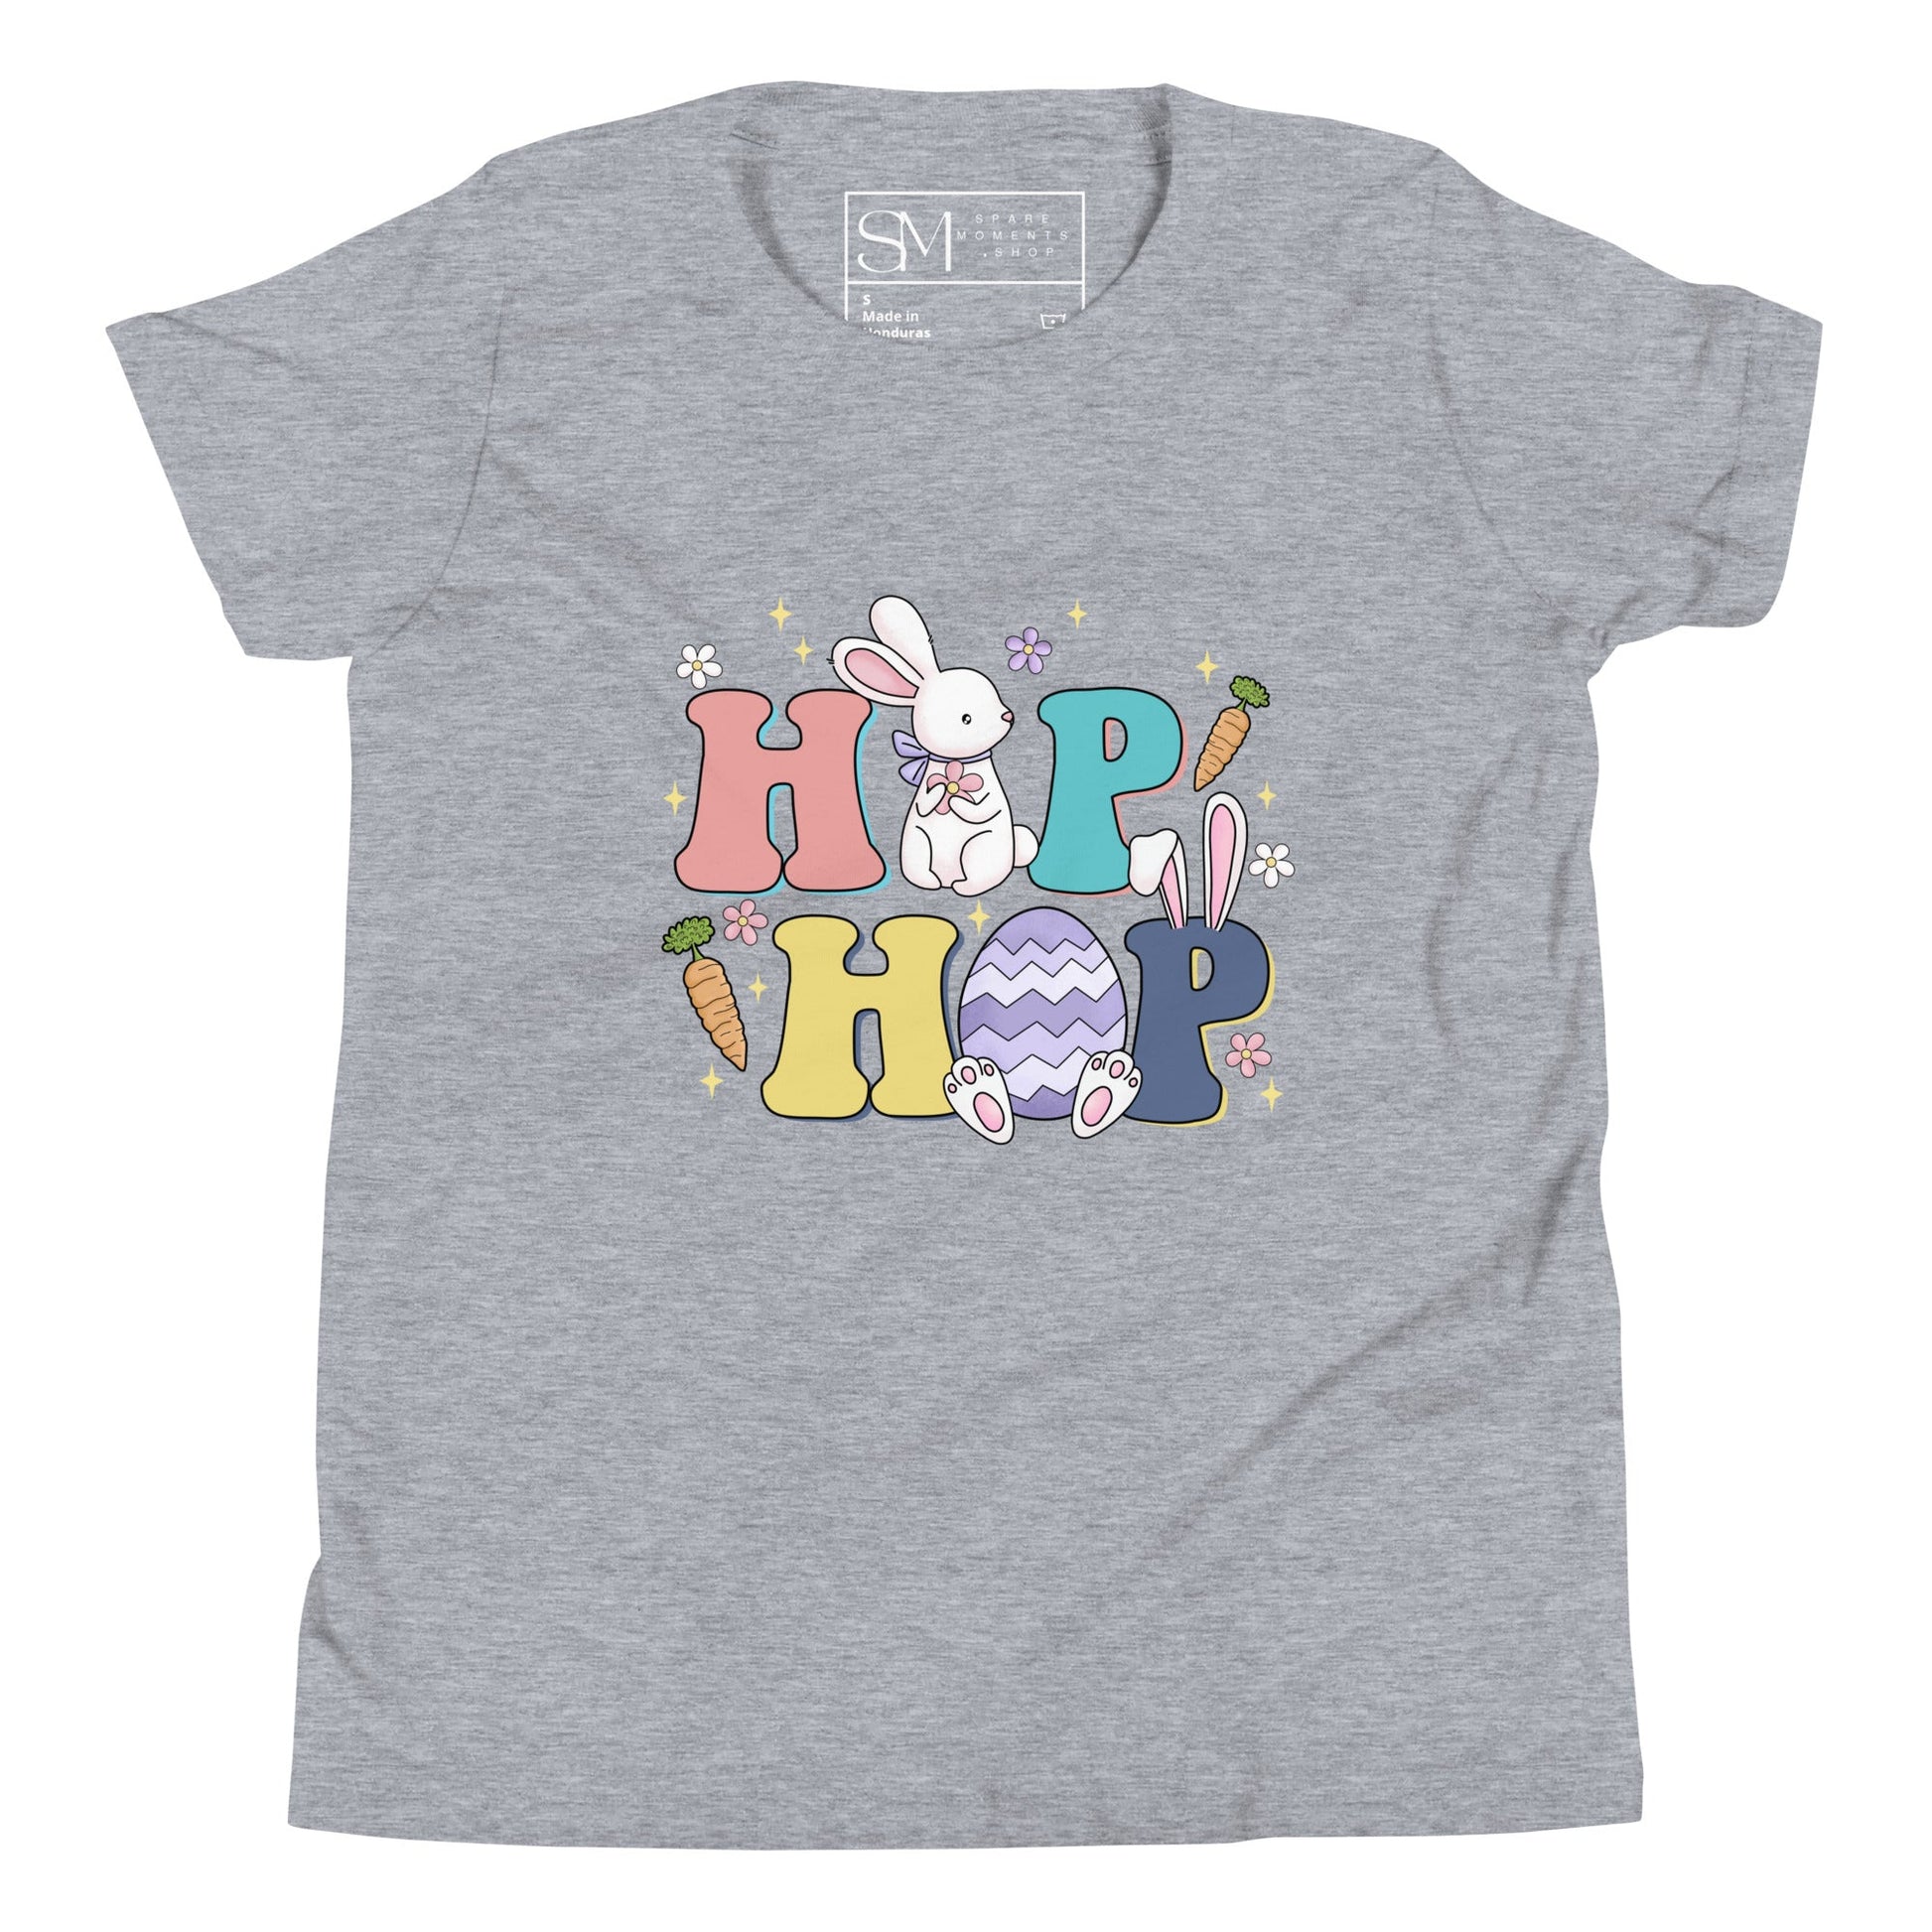 Easter Shirts For Kids